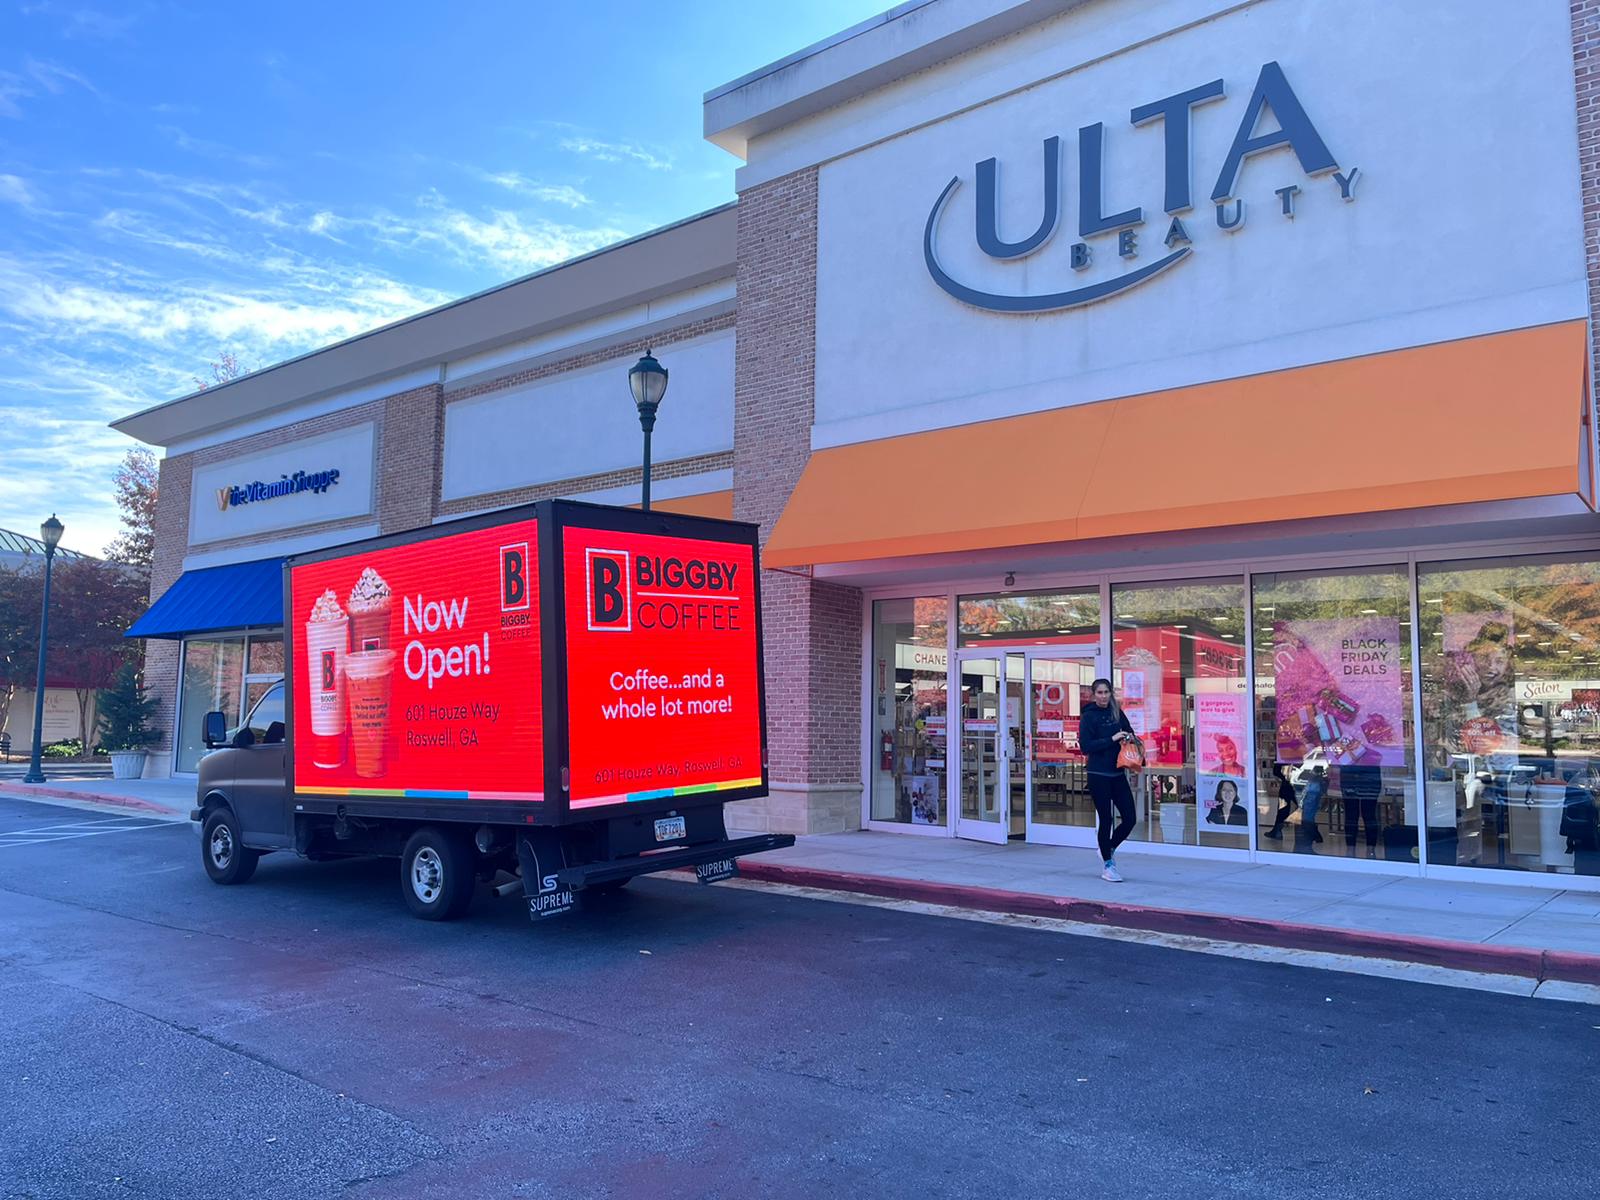 Cantmiss.US LED mobile billboard truck parked outside Ultra Beauty, displaying an advertisement for Biggby Coffee located at 601 Houze Way, Roswell, GA. The billboard is strategically positioned to target a demographic interested in both beauty and specialty coffee.